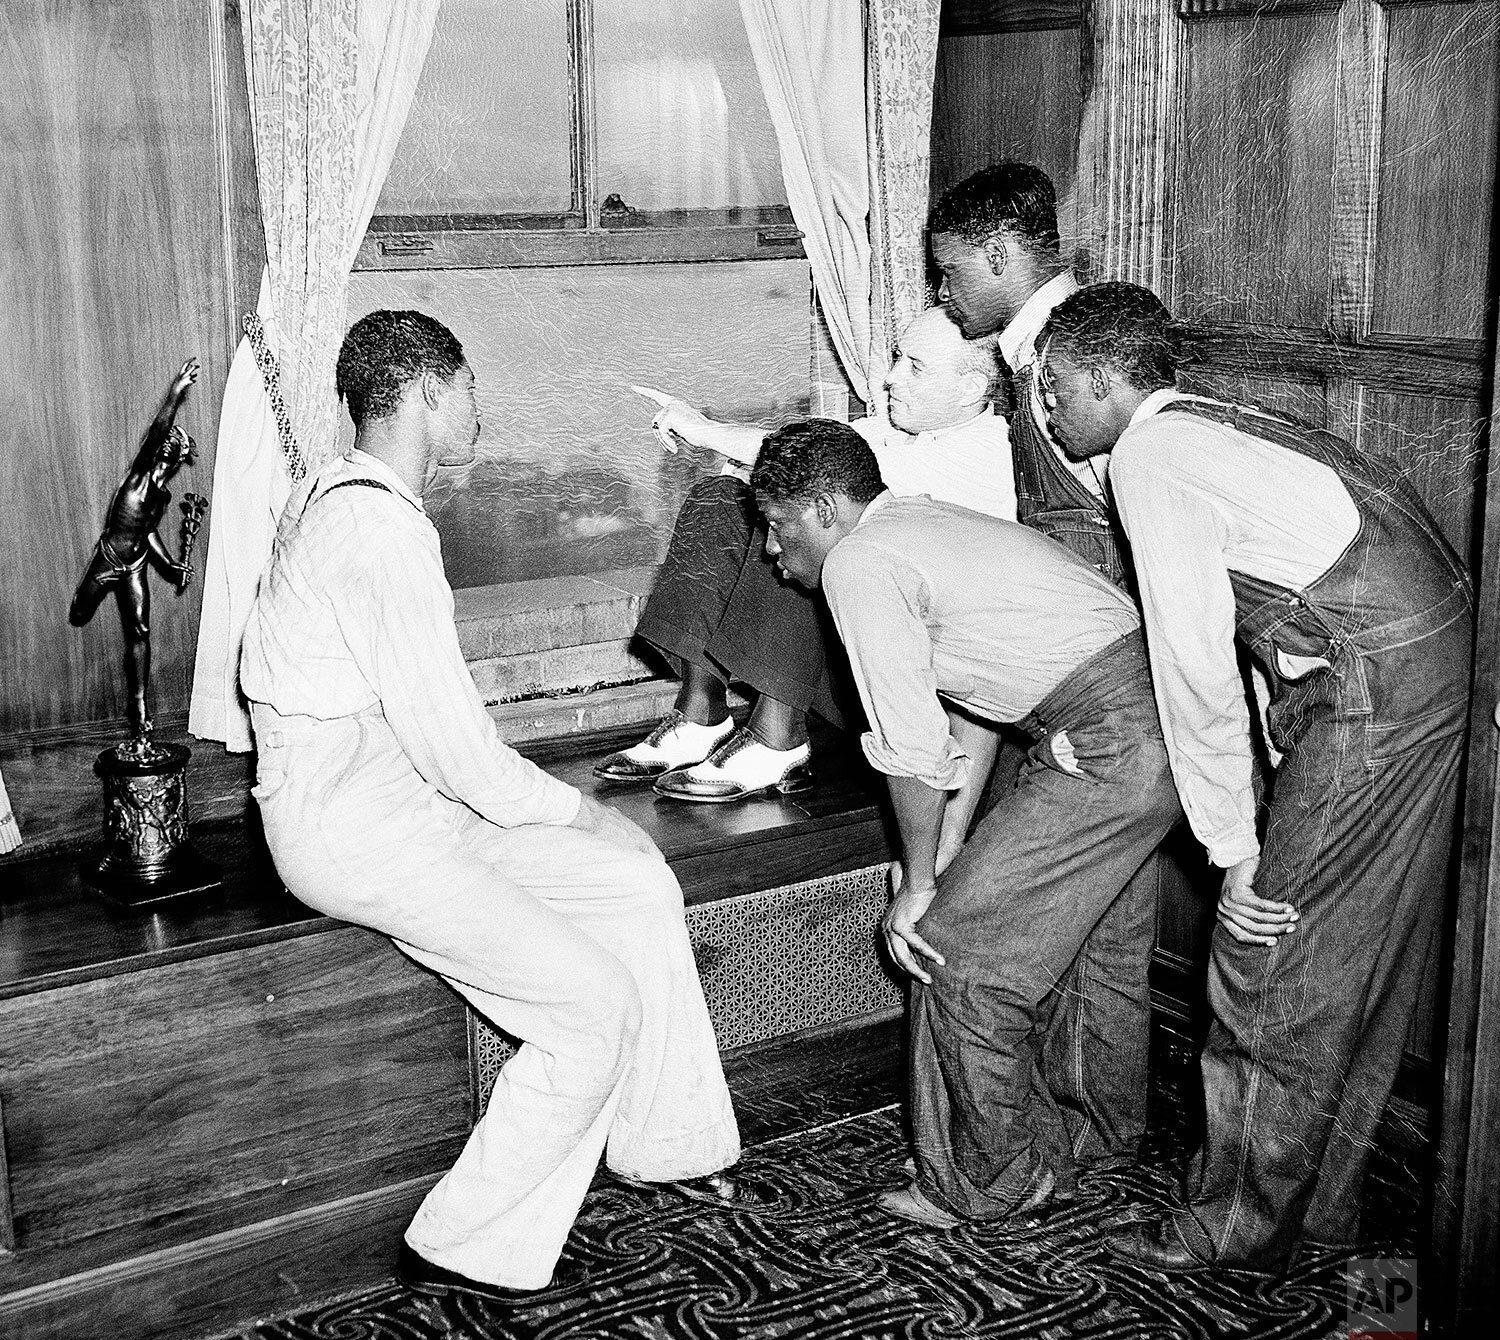  His finger pointing out the Statue of Liberty, Samuel Leibowitz, attorney, holds the attention of the four freed Scottsboro boys now visiting New York City from Alabama, July 26, 1937.   While Eugene Williams sits at left, and  the defendants cluste